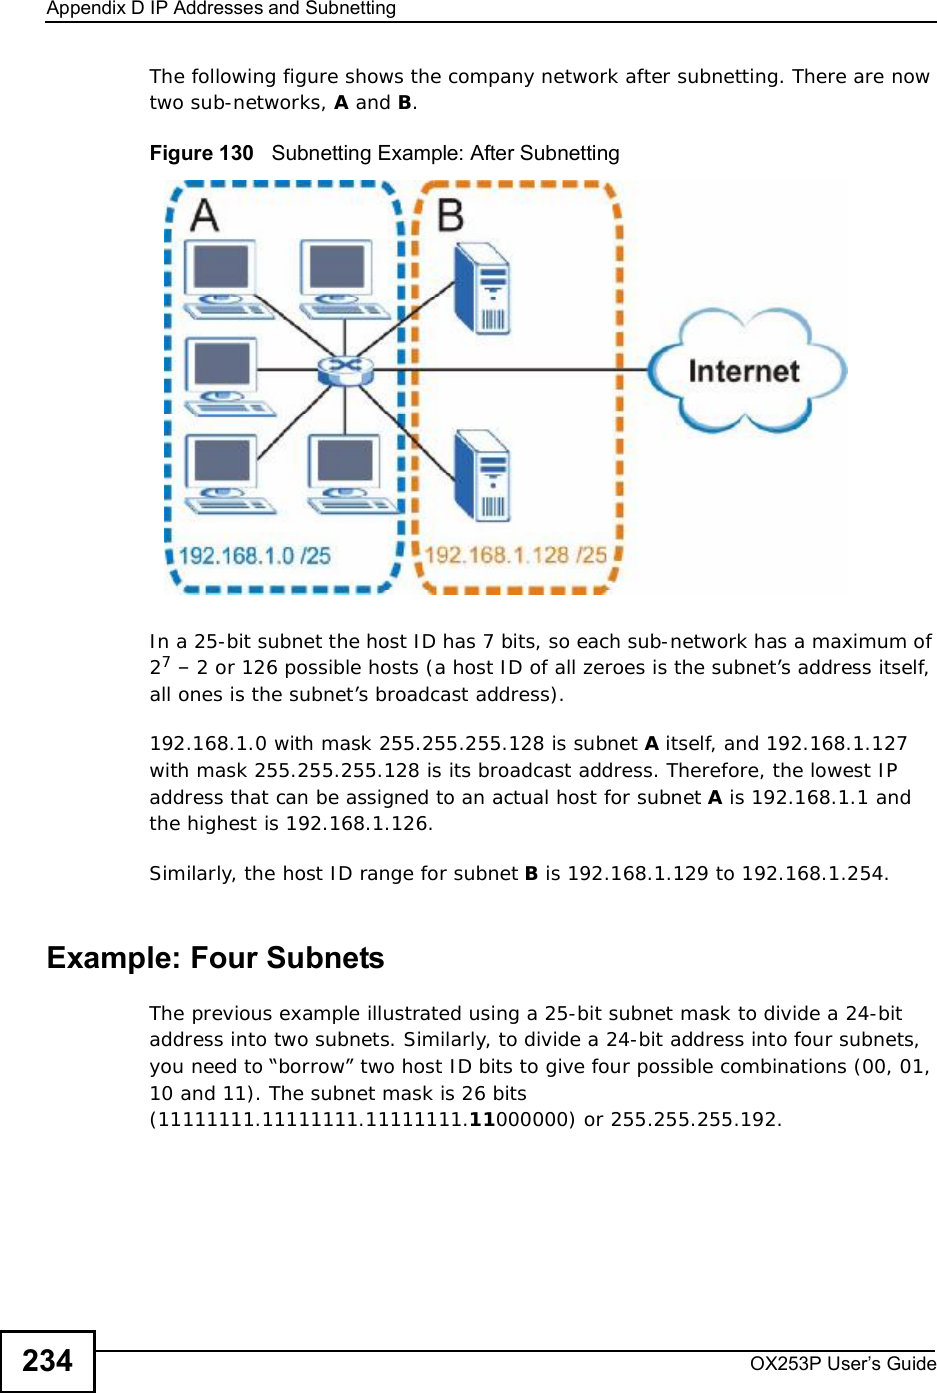 Appendix DIP Addresses and SubnettingOX253P User’s Guide234The following figure shows the company network after subnetting. There are now two sub-networks, A and B.Figure 130   Subnetting Example: After SubnettingIn a 25-bit subnet the host ID has 7 bits, so each sub-network has a maximum of 27 – 2 or 126 possible hosts (a host ID of all zeroes is the subnet’s address itself, all ones is the subnet’s broadcast address).192.168.1.0 with mask 255.255.255.128 is subnet A itself, and 192.168.1.127 with mask 255.255.255.128 is its broadcast address. Therefore, the lowest IP address that can be assigned to an actual host for subnet A is 192.168.1.1 and the highest is 192.168.1.126. Similarly, the host ID range for subnet B is 192.168.1.129 to 192.168.1.254.Example: Four Subnets The previous example illustrated using a 25-bit subnet mask to divide a 24-bit address into two subnets. Similarly, to divide a 24-bit address into four subnets, you need to “borrow” two host ID bits to give four possible combinations (00, 01, 10 and 11). The subnet mask is 26 bits (11111111.11111111.11111111.11000000) or 255.255.255.192. 